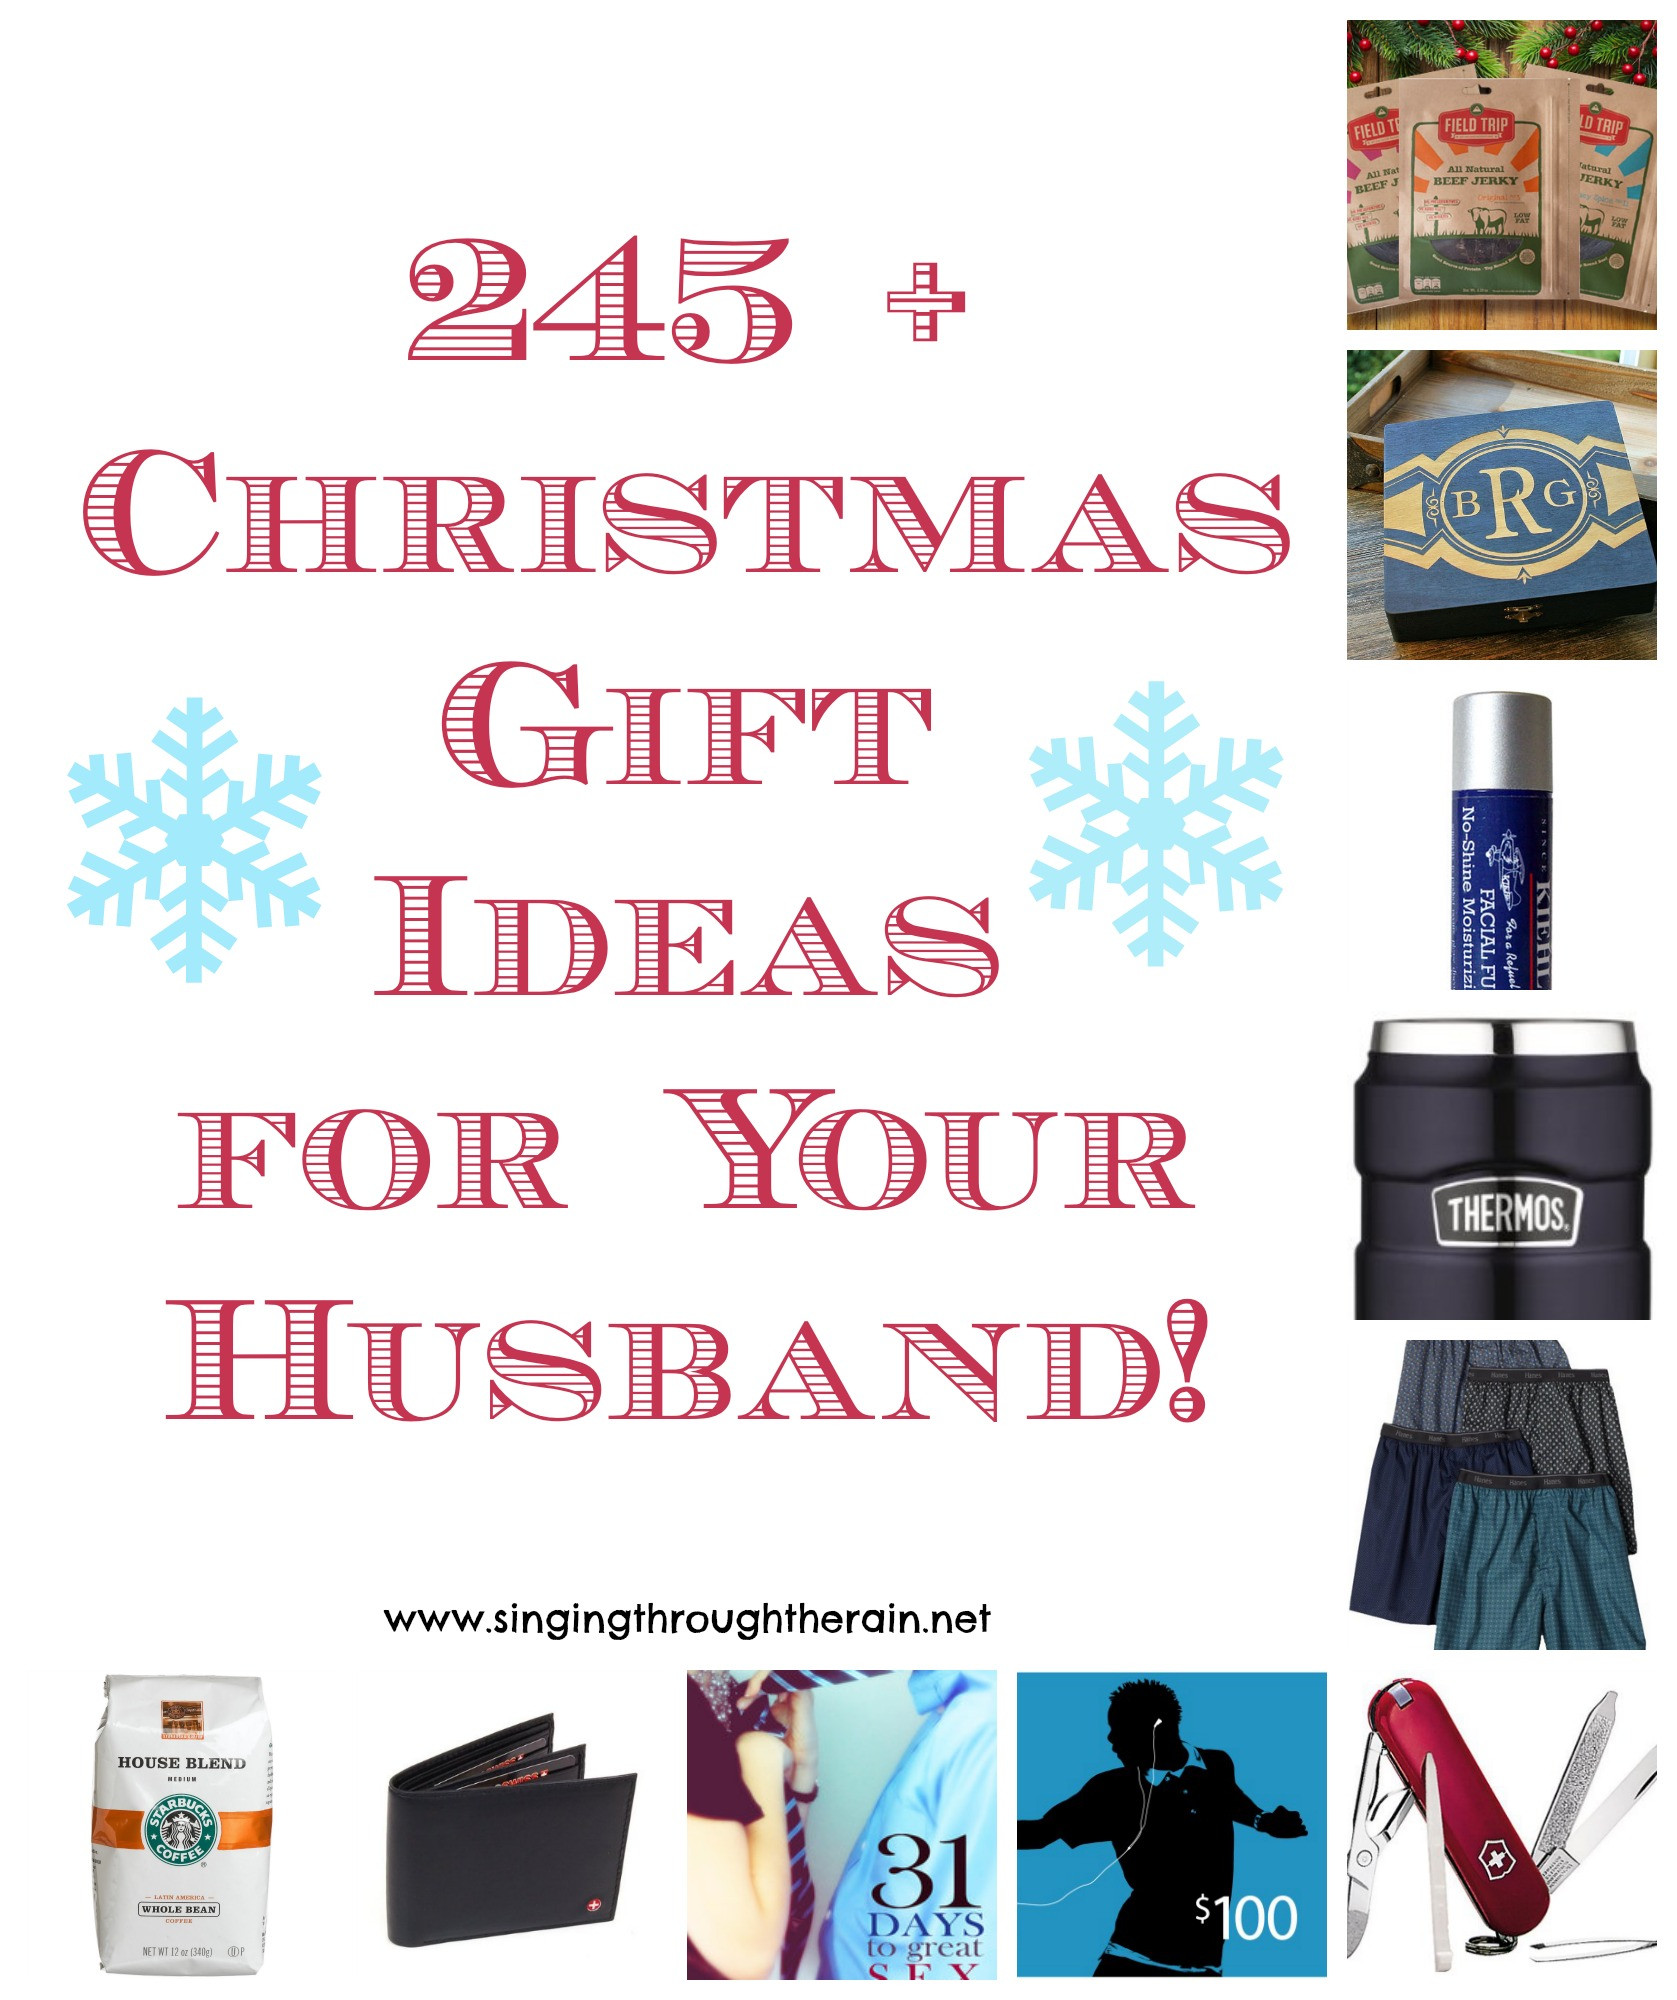 Christmas Gift Ideas For Your Husband
 245 Christmas Gift Ideas for Your Husband